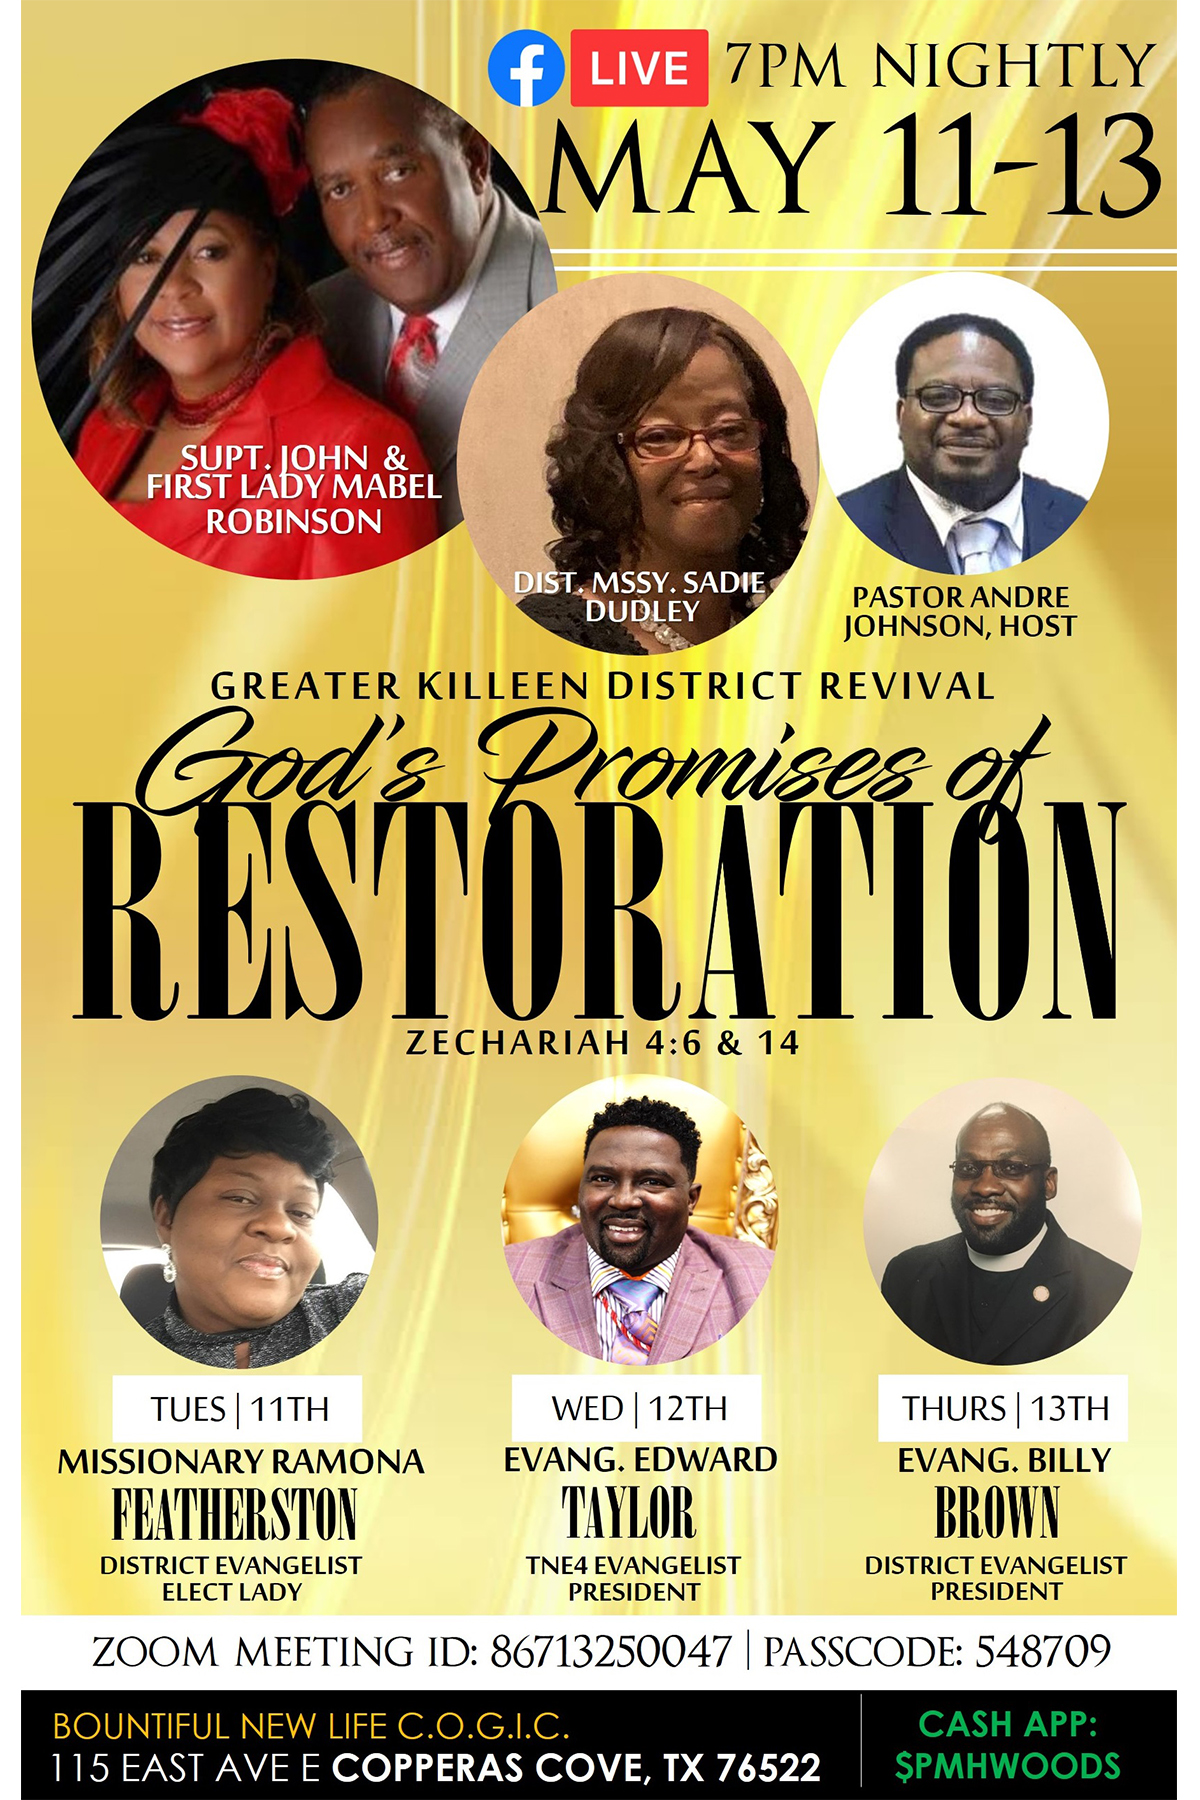 Speaking Engagement: Greater Killeen District Revival